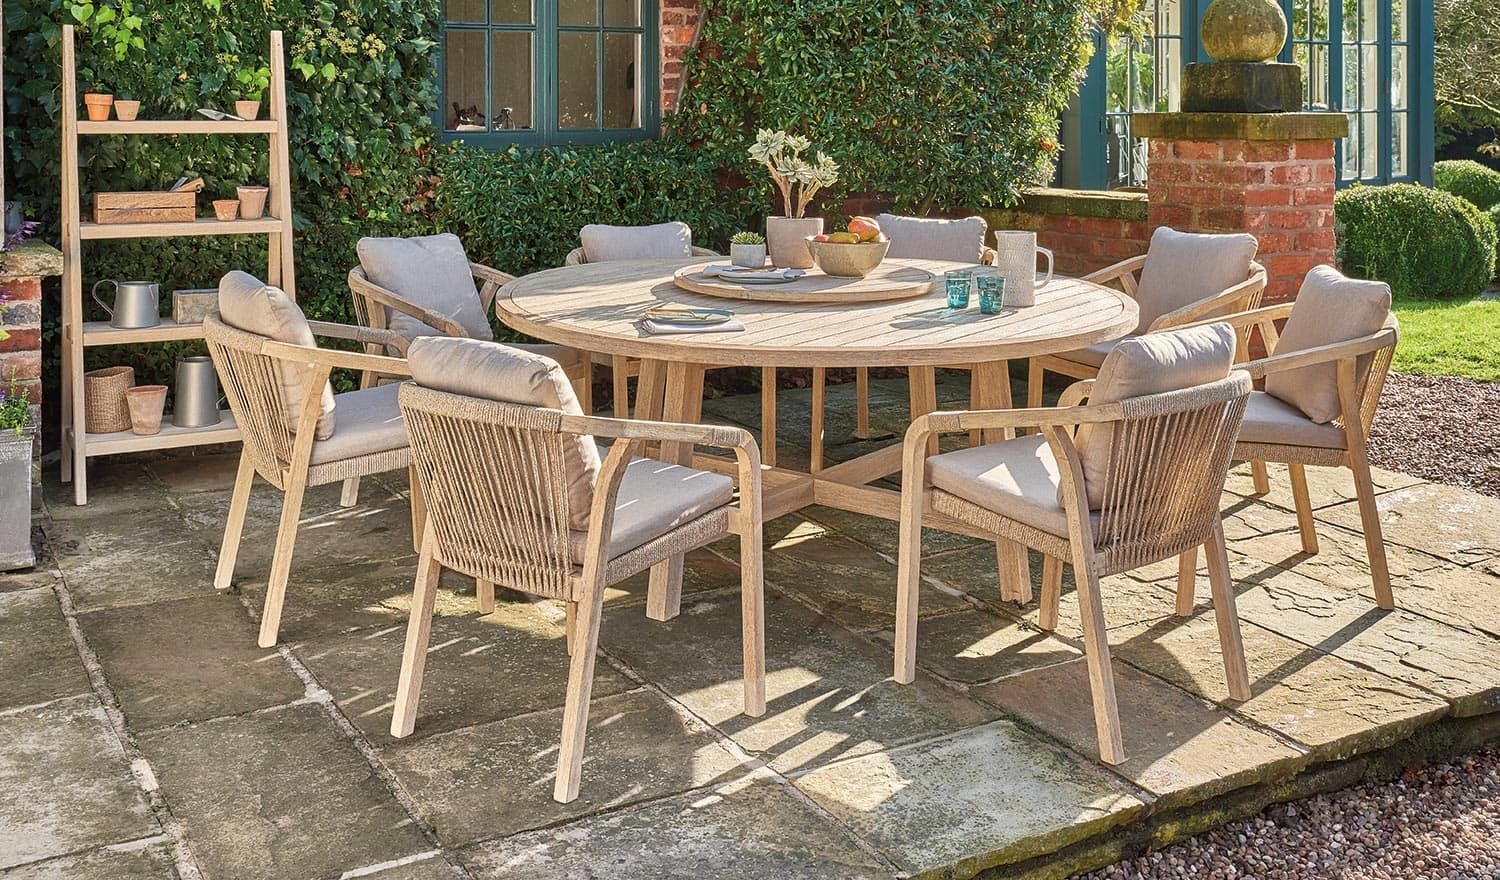 Cora Dining Kettler Official Site, Round Wooden Table And Chairs For Garden